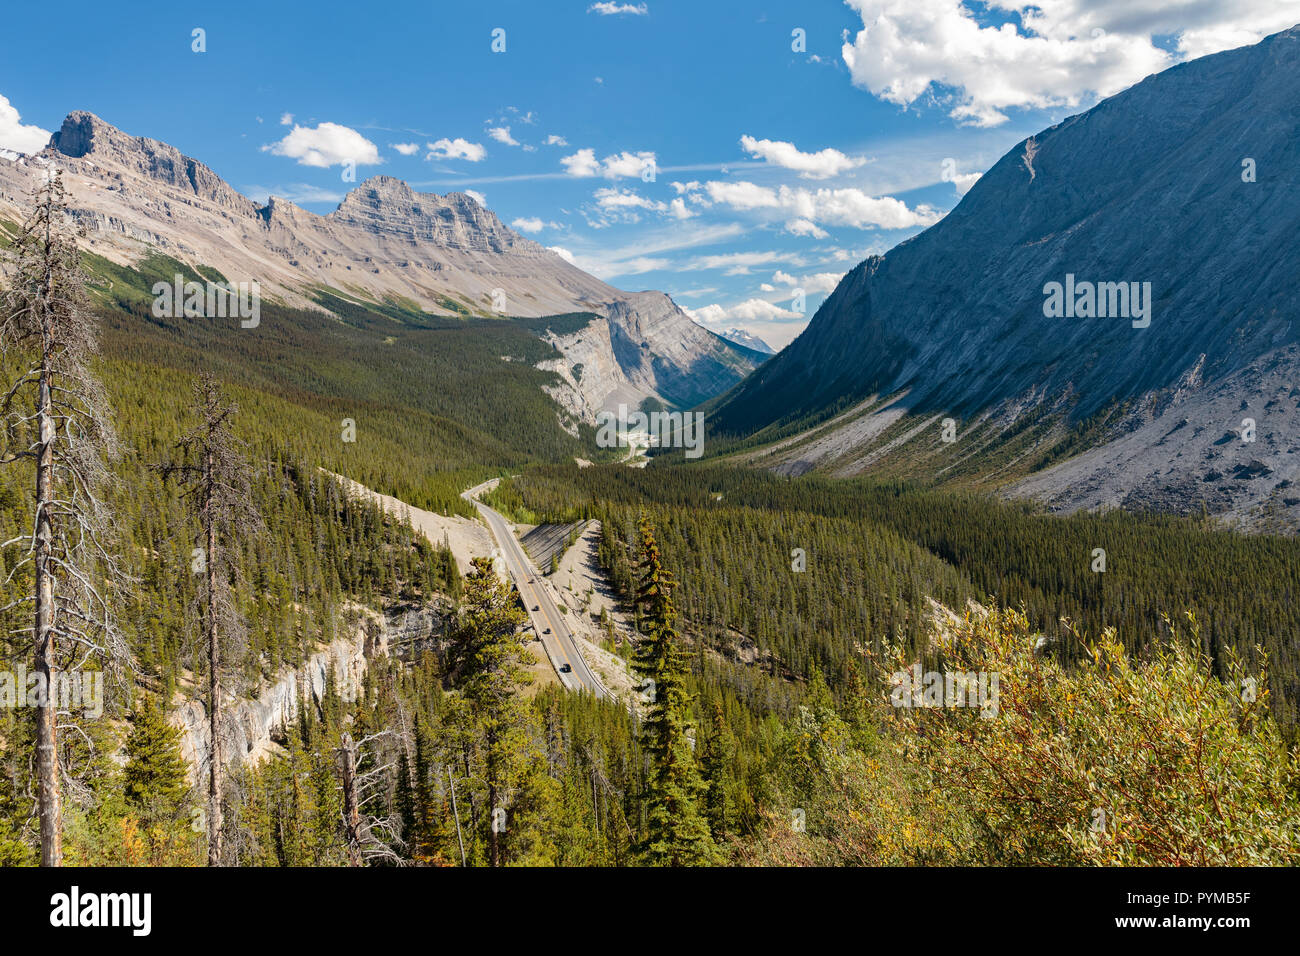 View of forests and mountains from the Icefields Parkway, Alberta, Canada Stock Photo